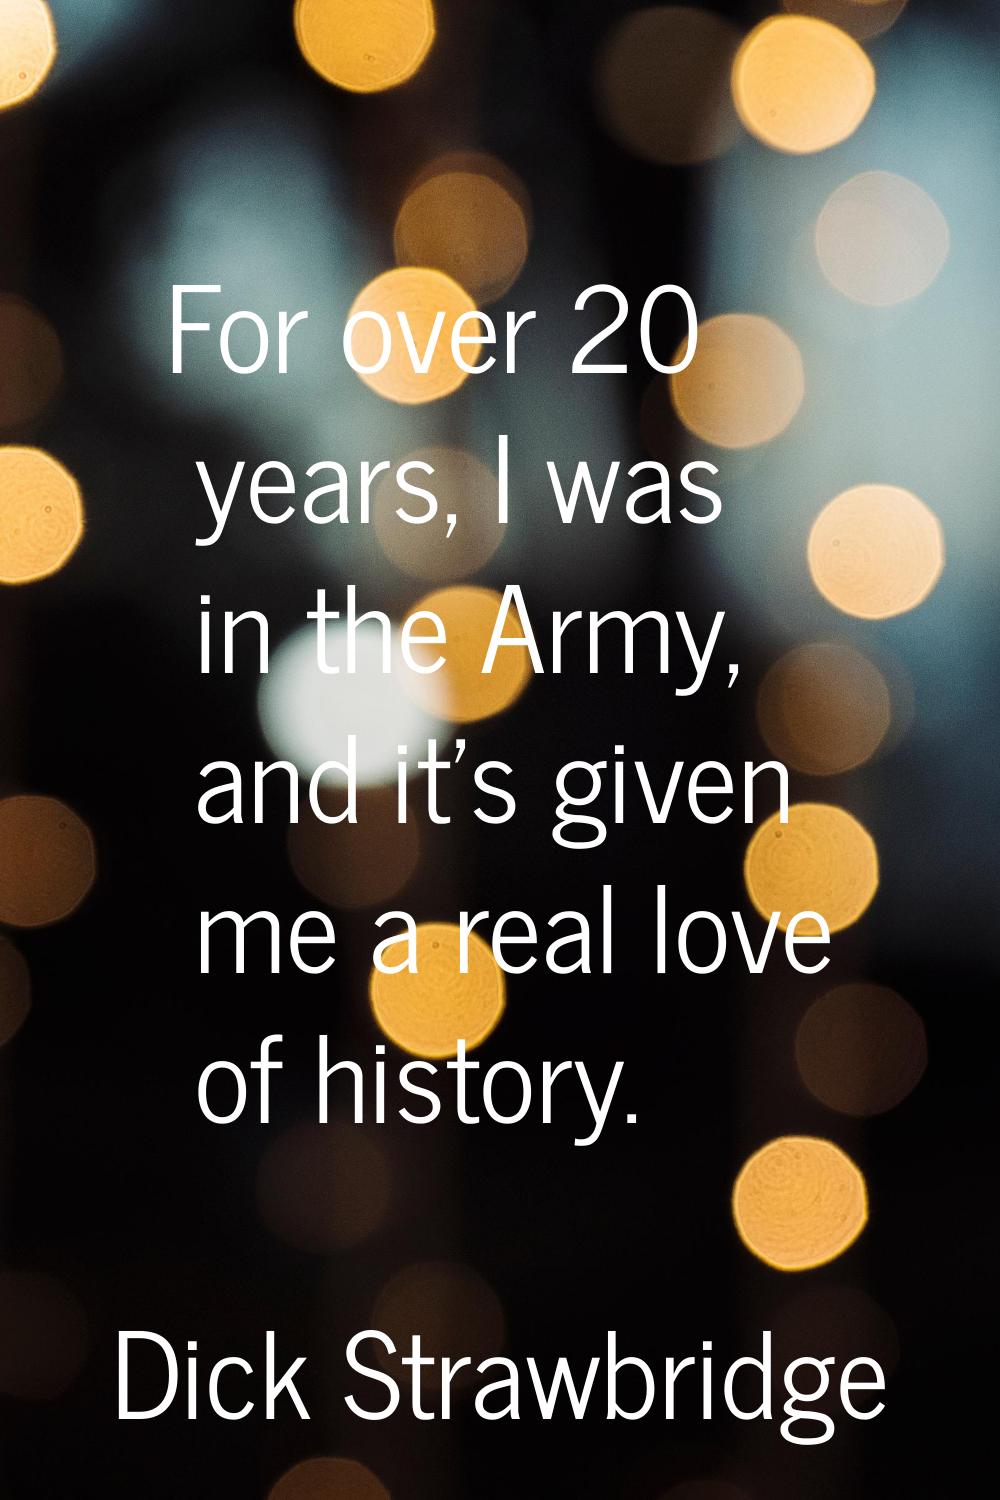 For over 20 years, I was in the Army, and it's given me a real love of history.